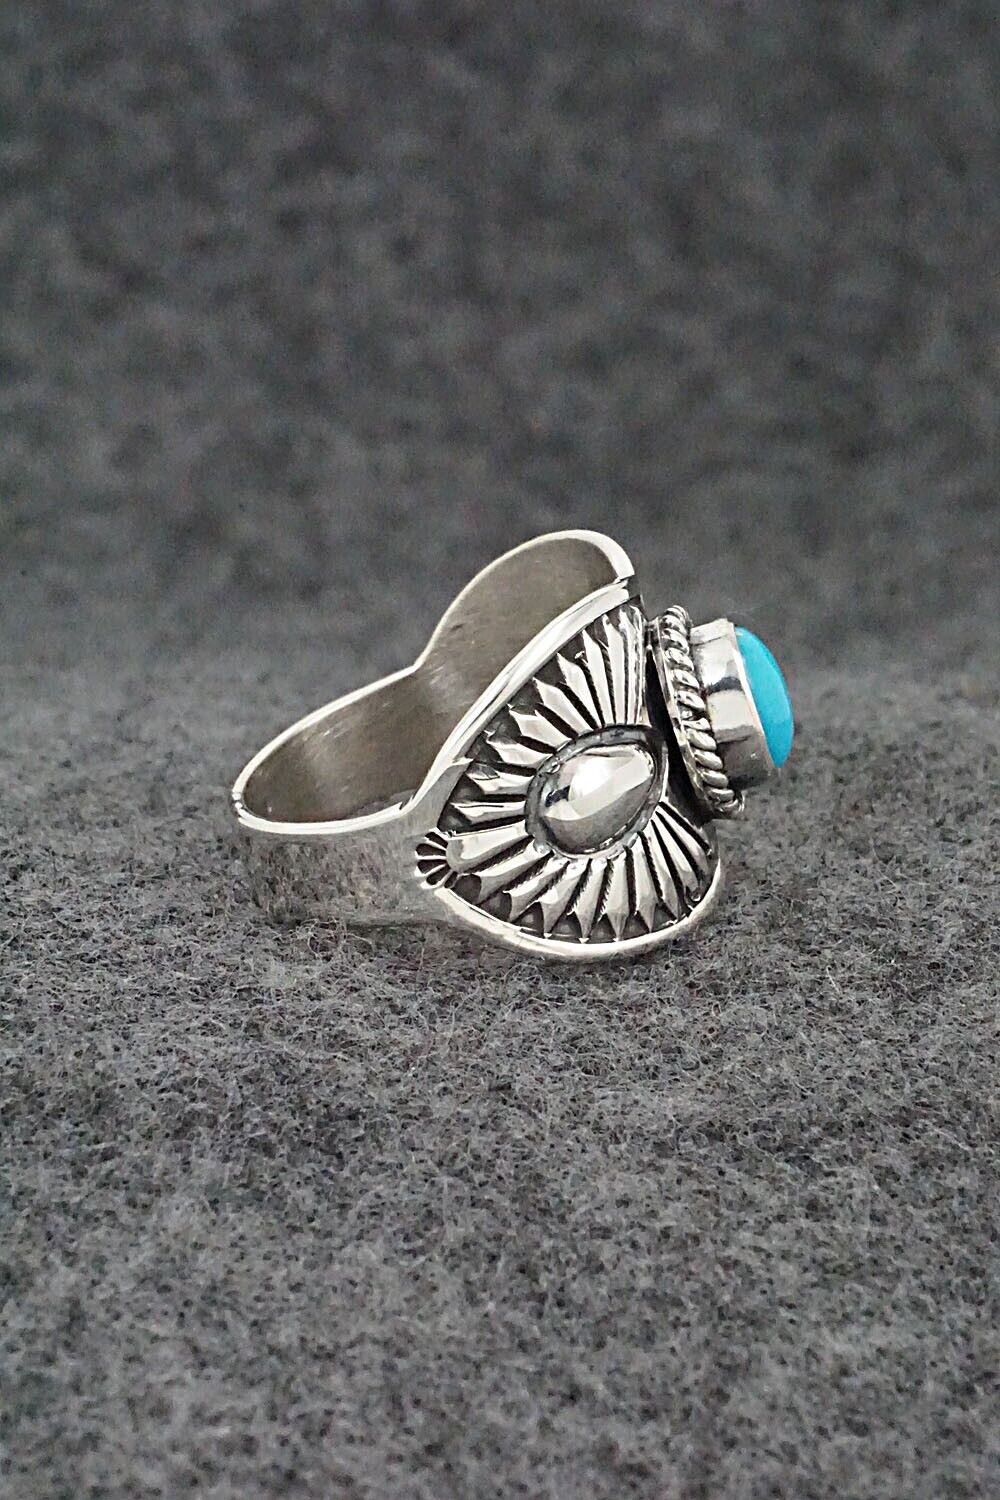 Turquoise & Sterling Silver Ring - Derrick Gordon - Size 8.5